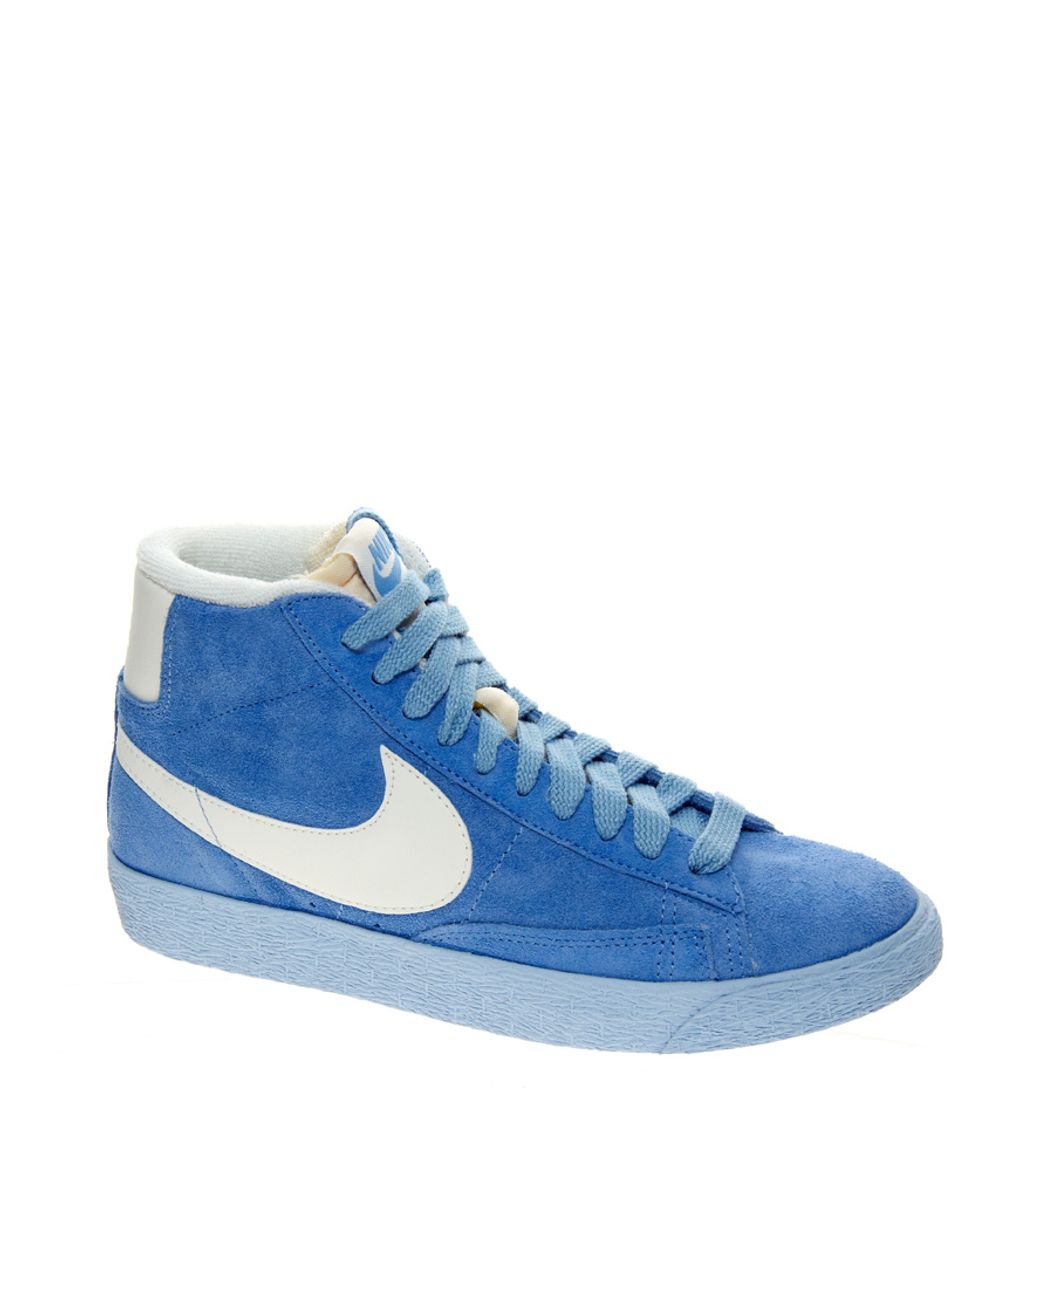 Nike Blazer Mid Blue Suede High Top Trainers for Men | Lyst